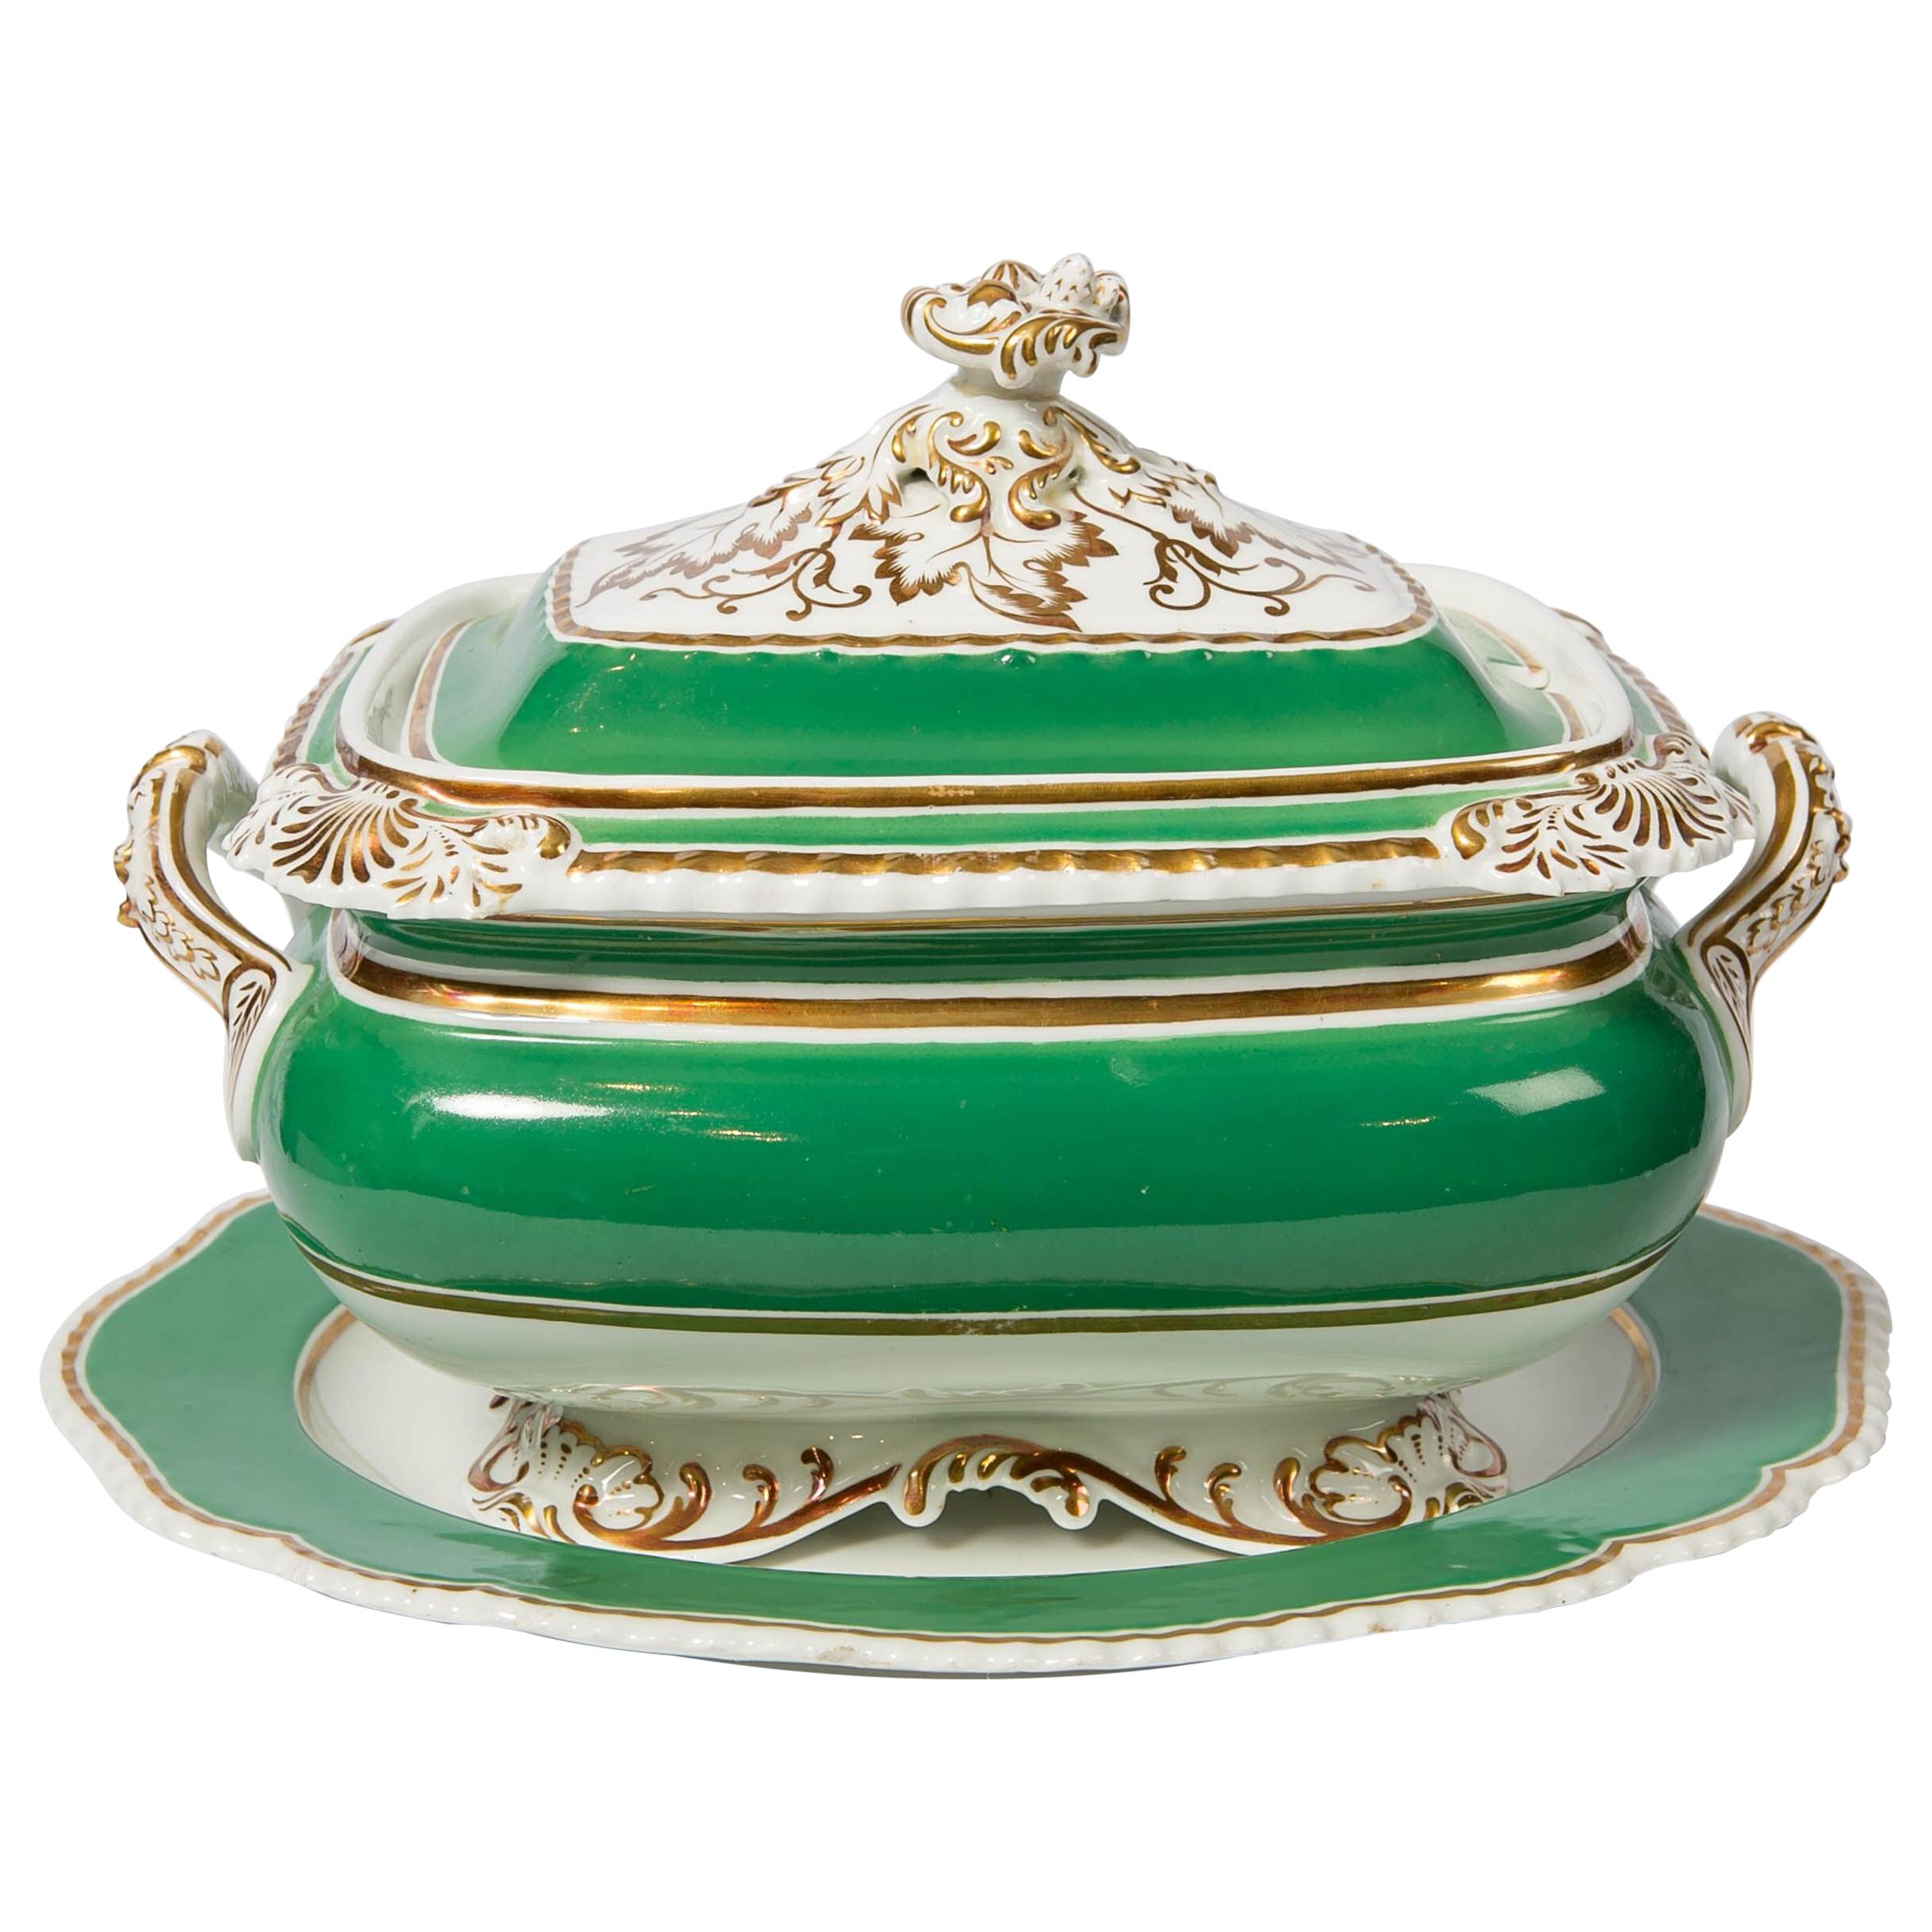 Chamberlains Worcester Green Soup Tureen Made in England, circa 1825